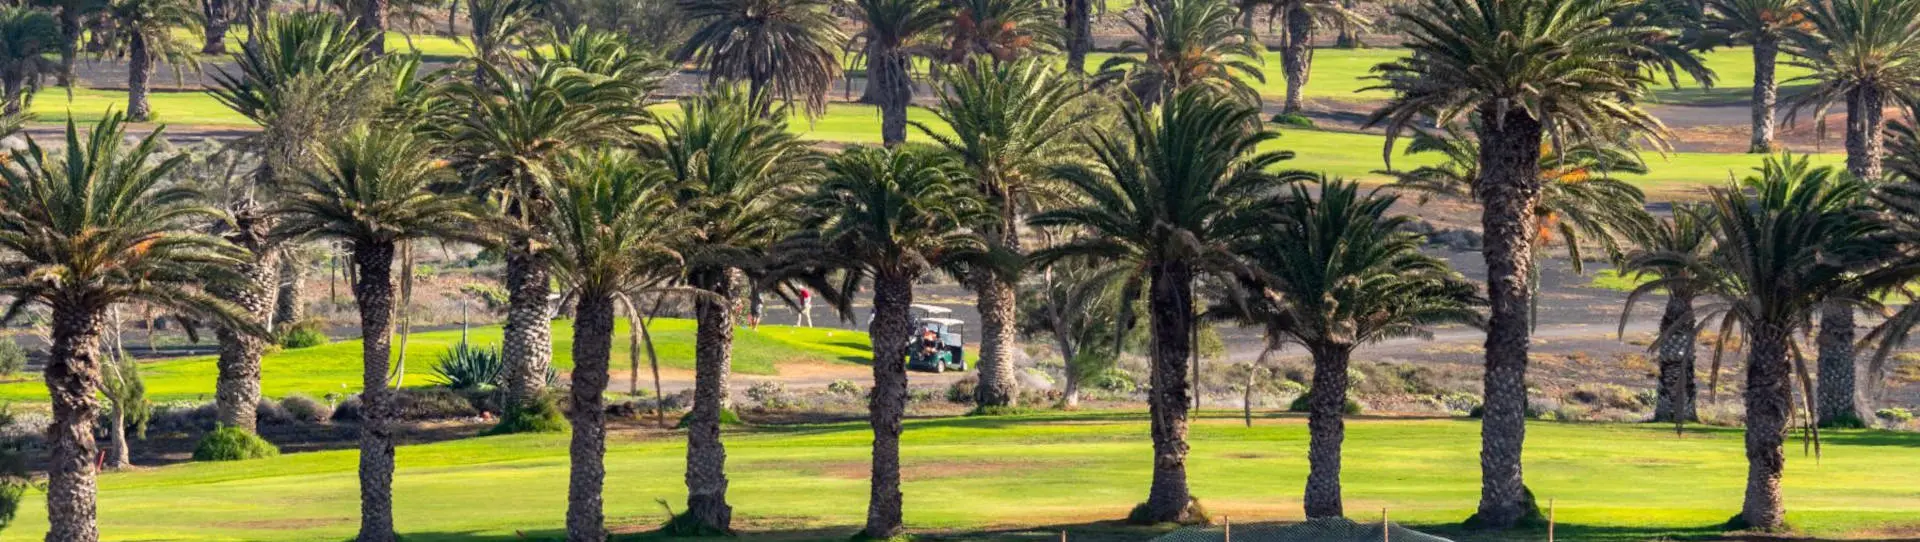 Spain golf holidays - Costa Teguise & Lanzarote Golf Four Rounds Pack - Photo 2